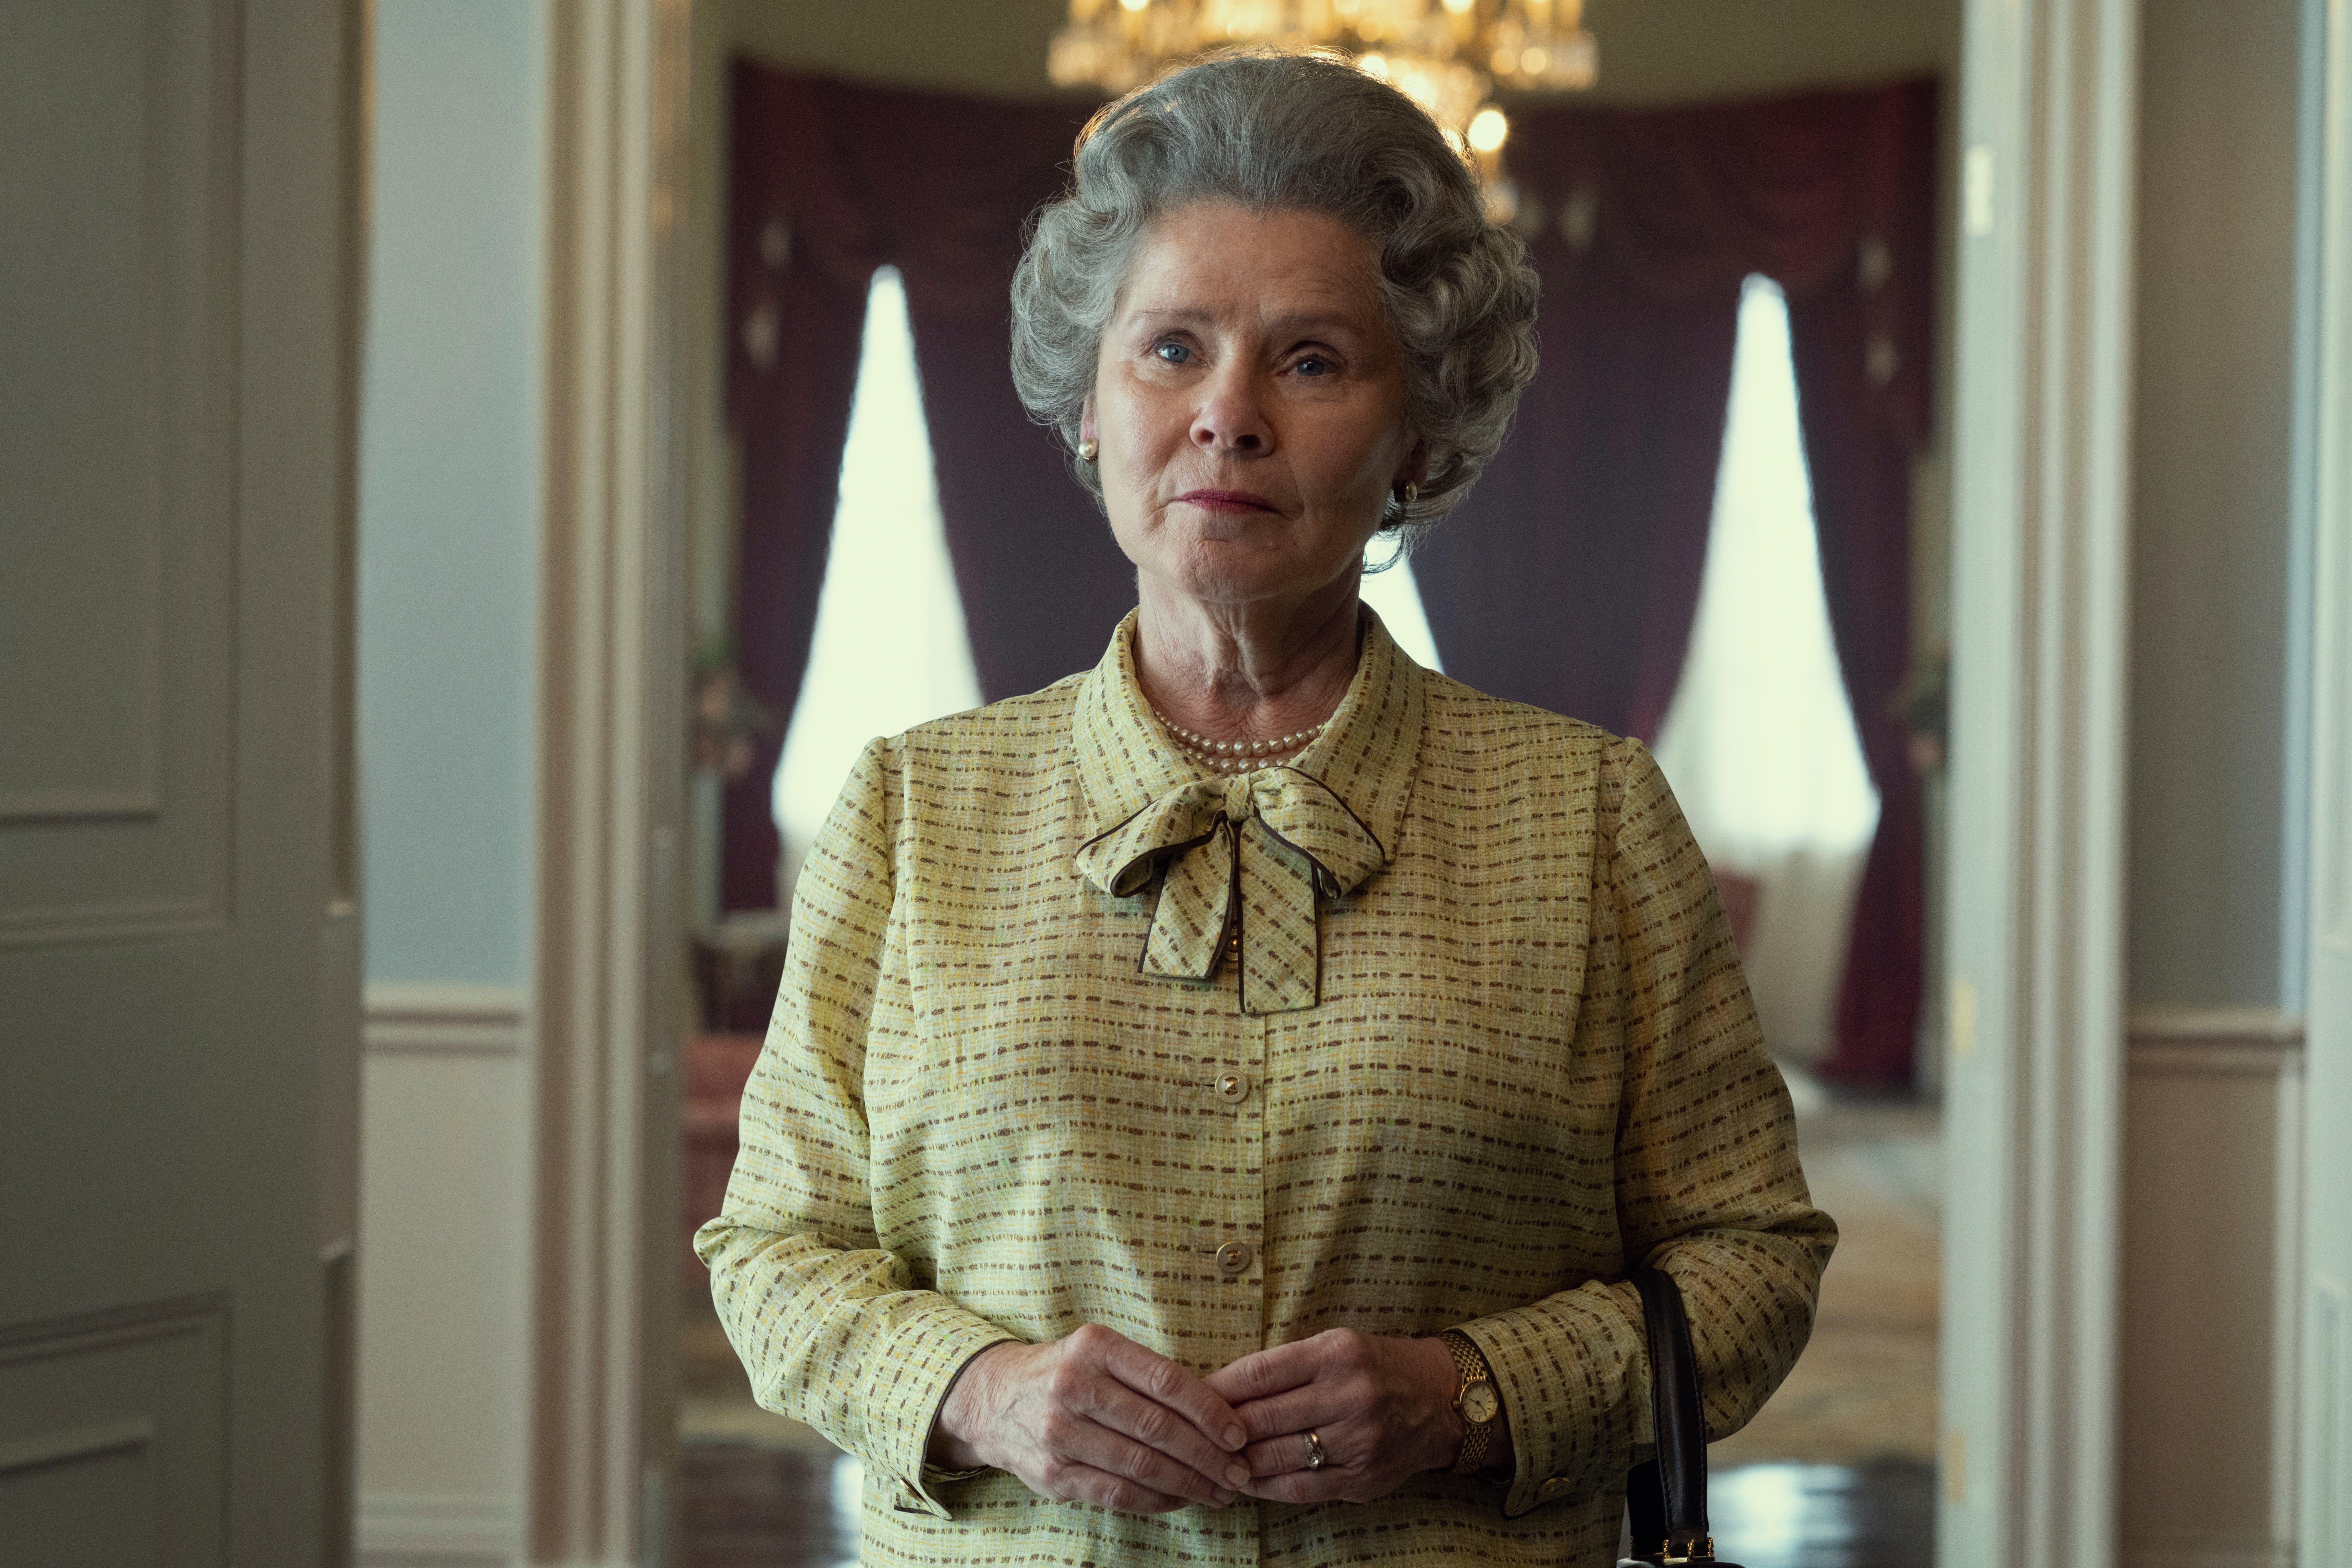 Imelda Staunton will take over the role of Queen Elizabeth II in series 5 of ‘The Crown’